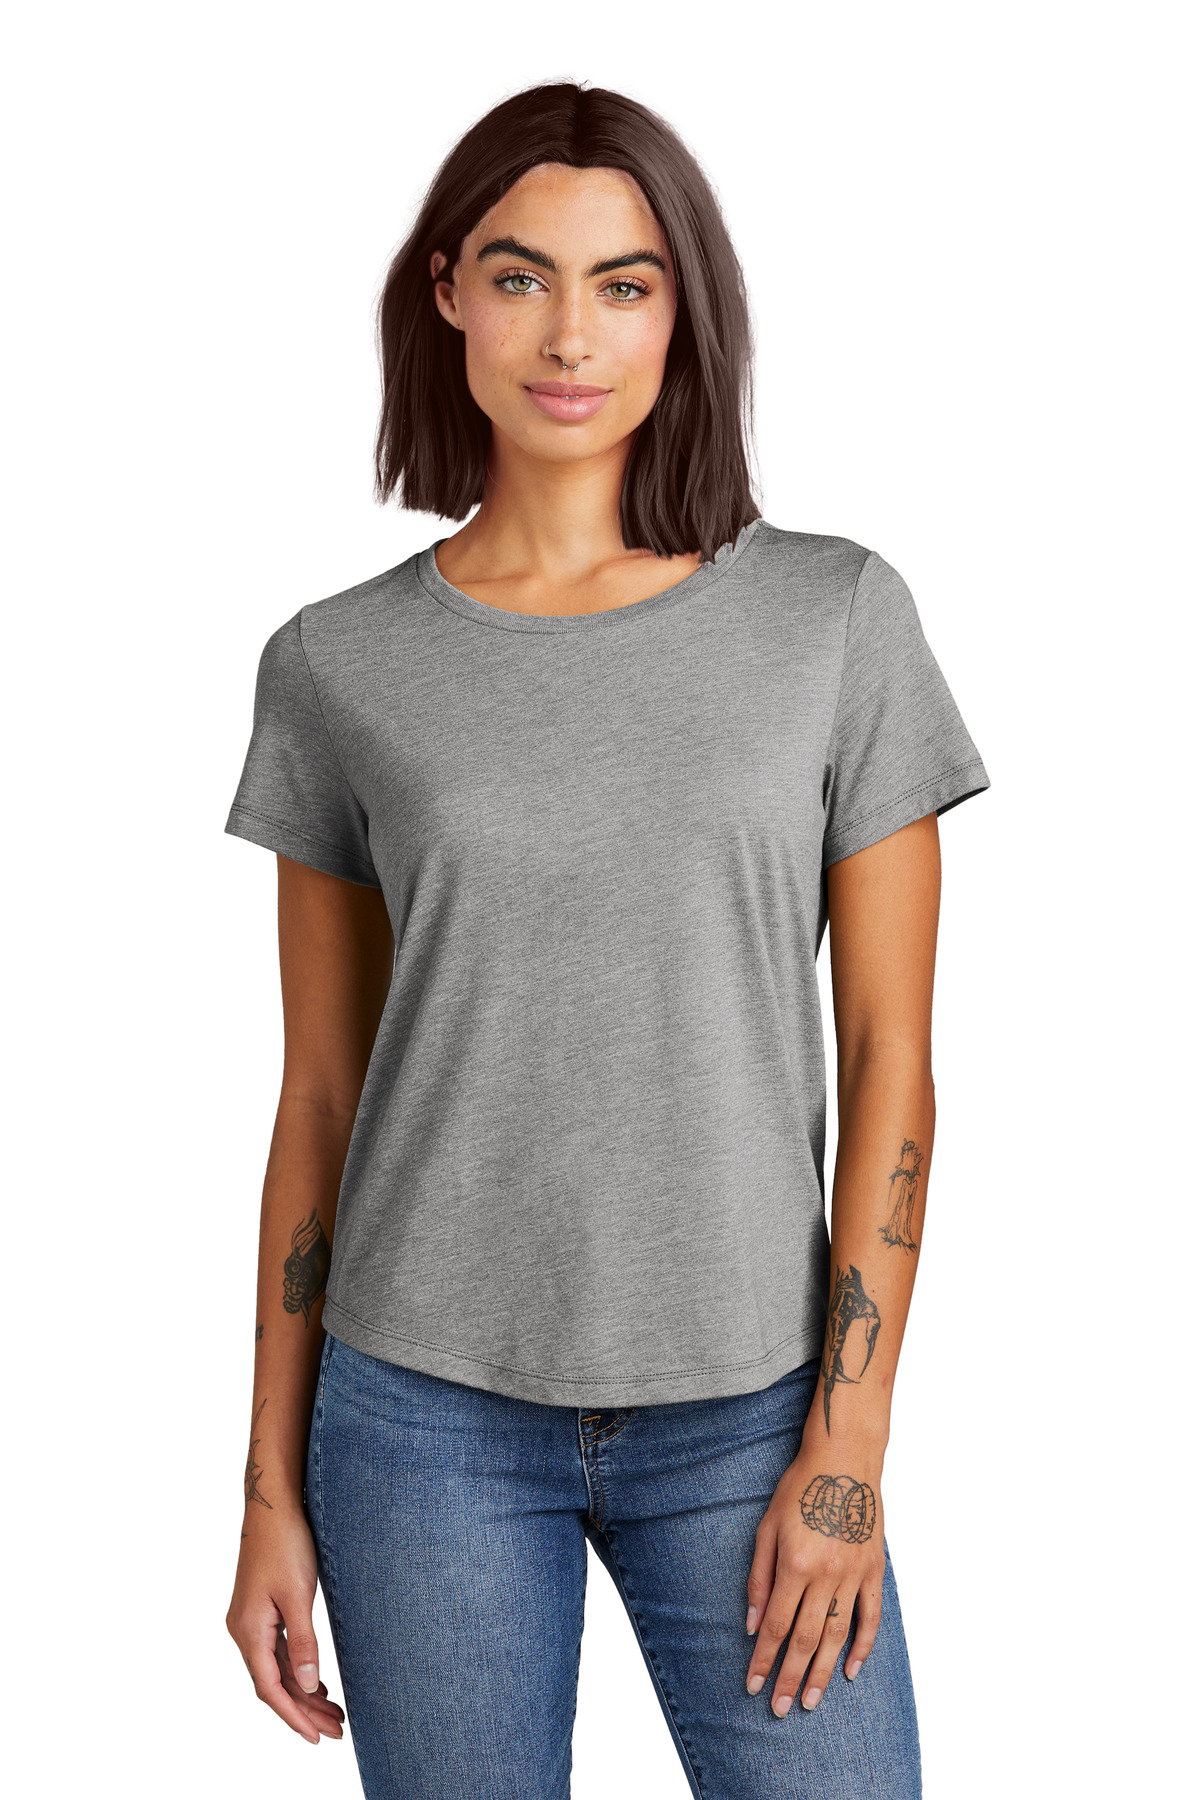 Allmade Womens Relaxed Tri-Blend Scoop Neck Tee AL2015